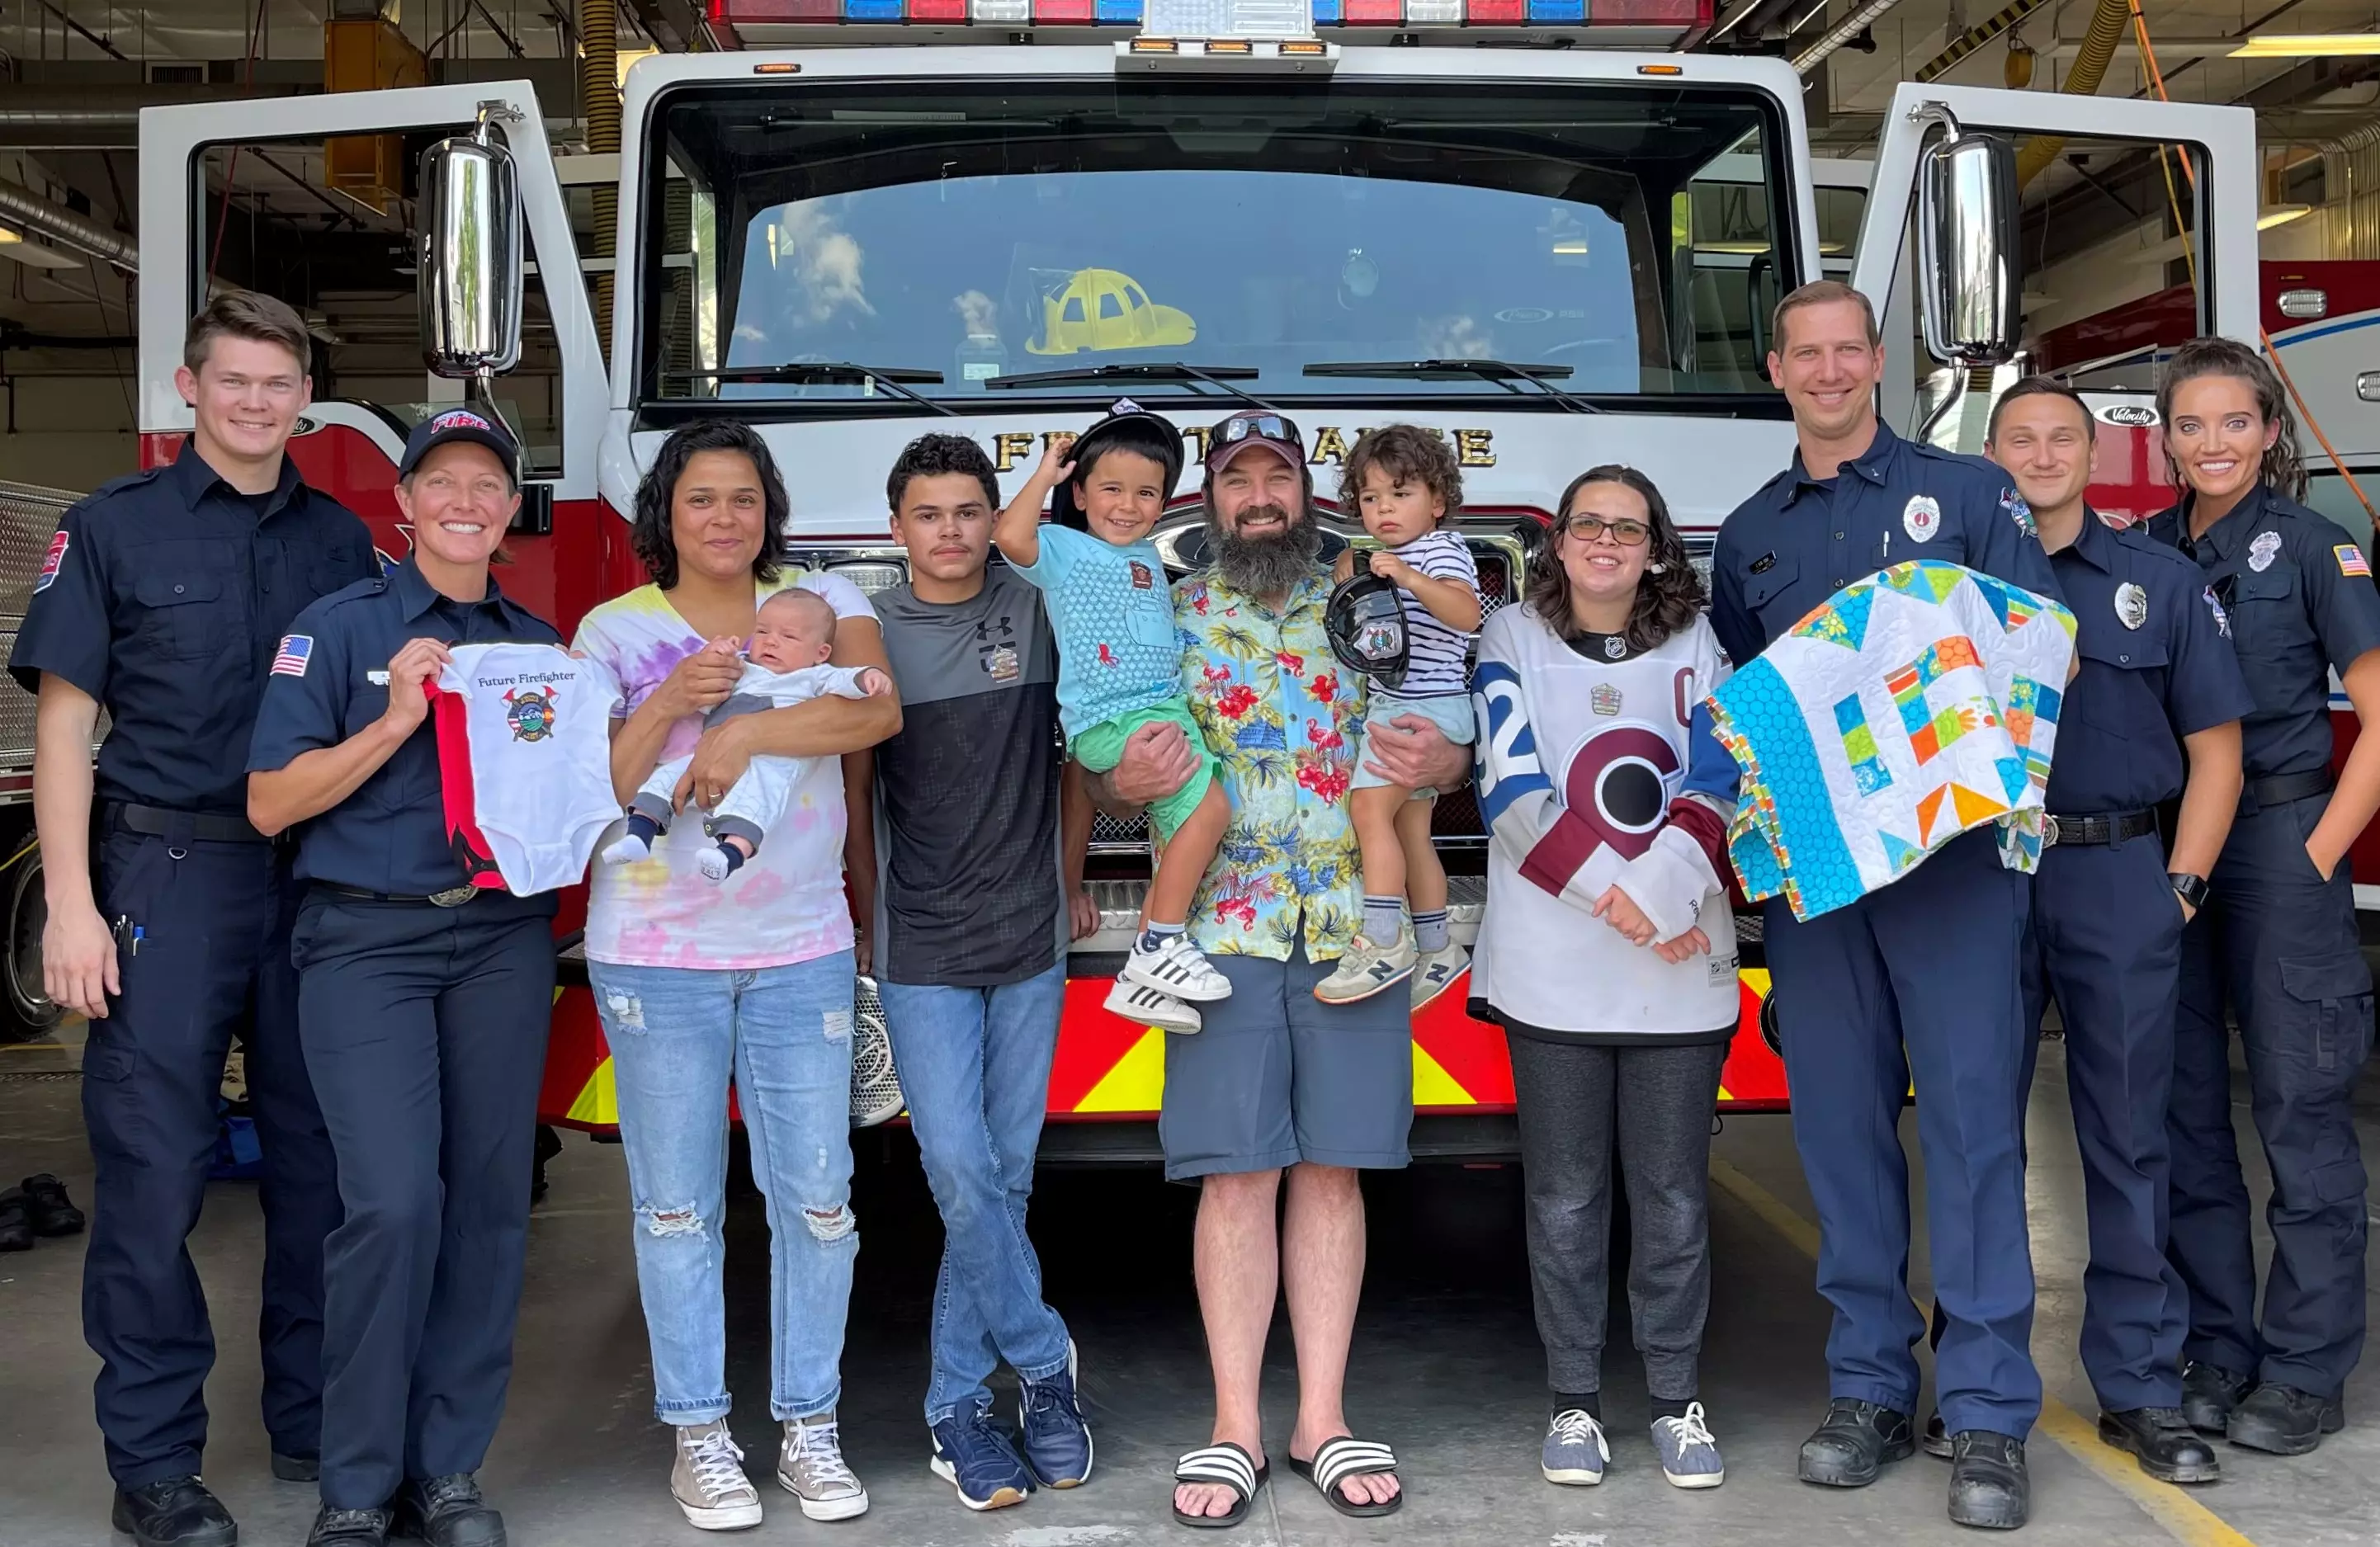 Firefighters and EMS crew with family and baby